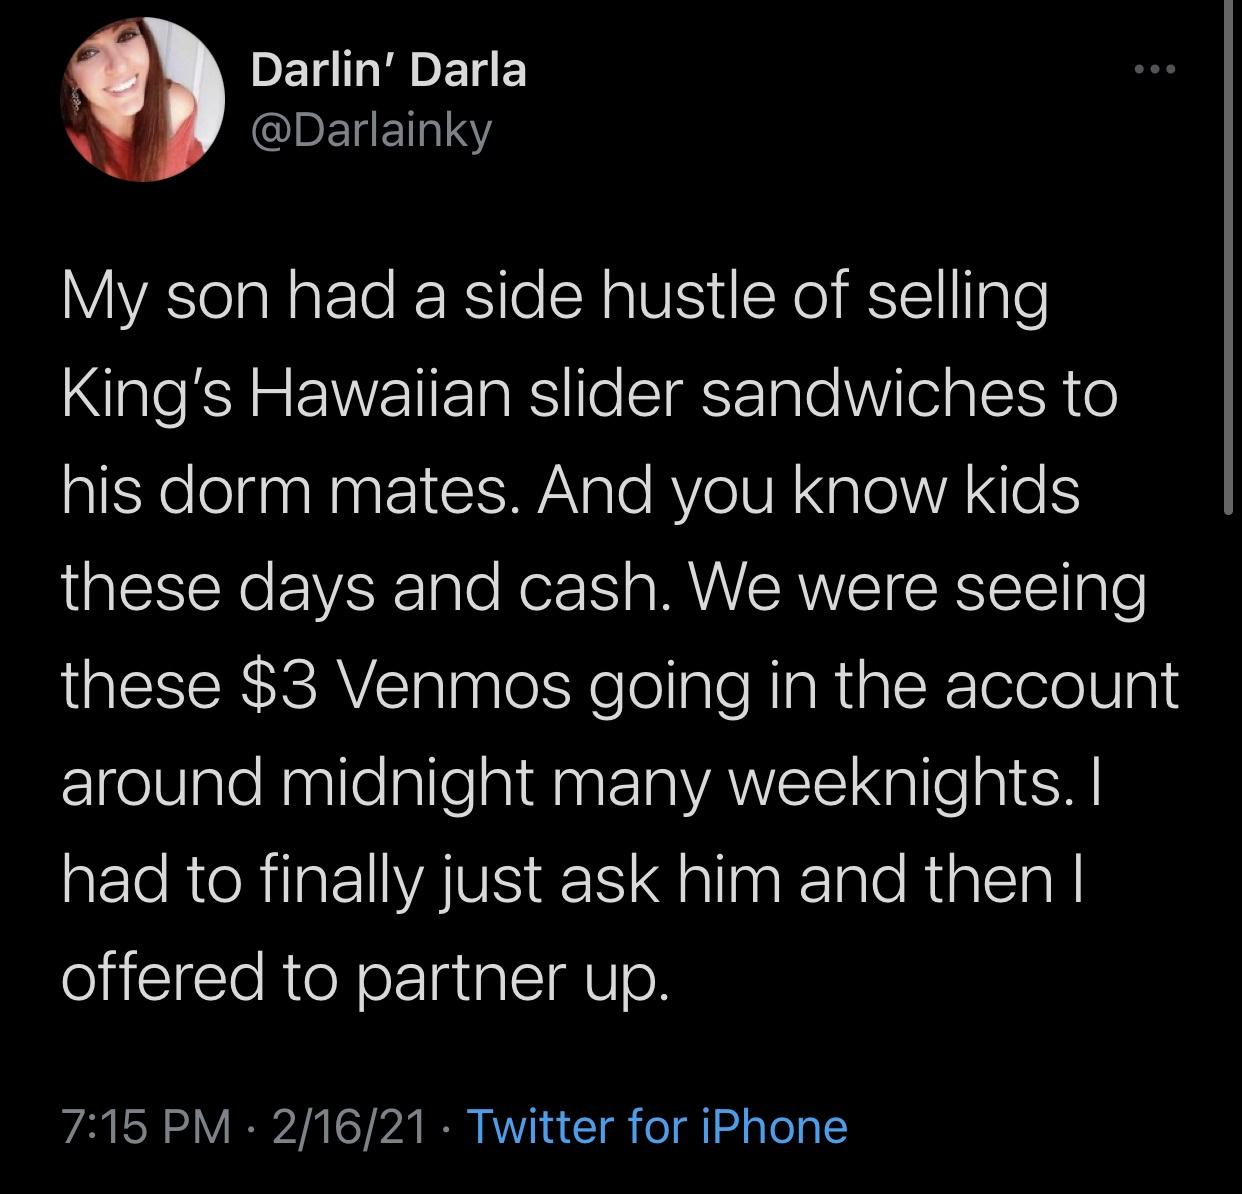 good night quotes - Darlin' Darla My son had a side hustle of selling King's Hawaiian slider sandwiches to his dorm mates. And you know kids these days and cash. We were seeing these $3 Venmos going in the account around midnight many weeknights. I had to